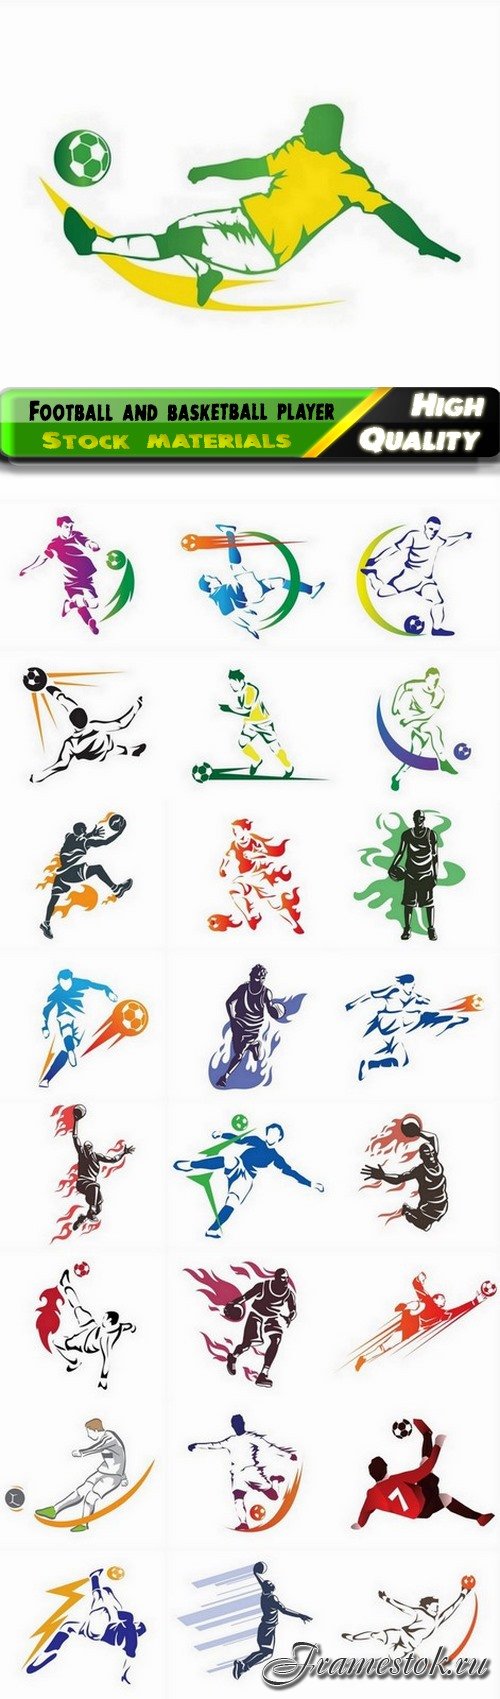 Colorful silhouette of a football and basketball player in motion - 25